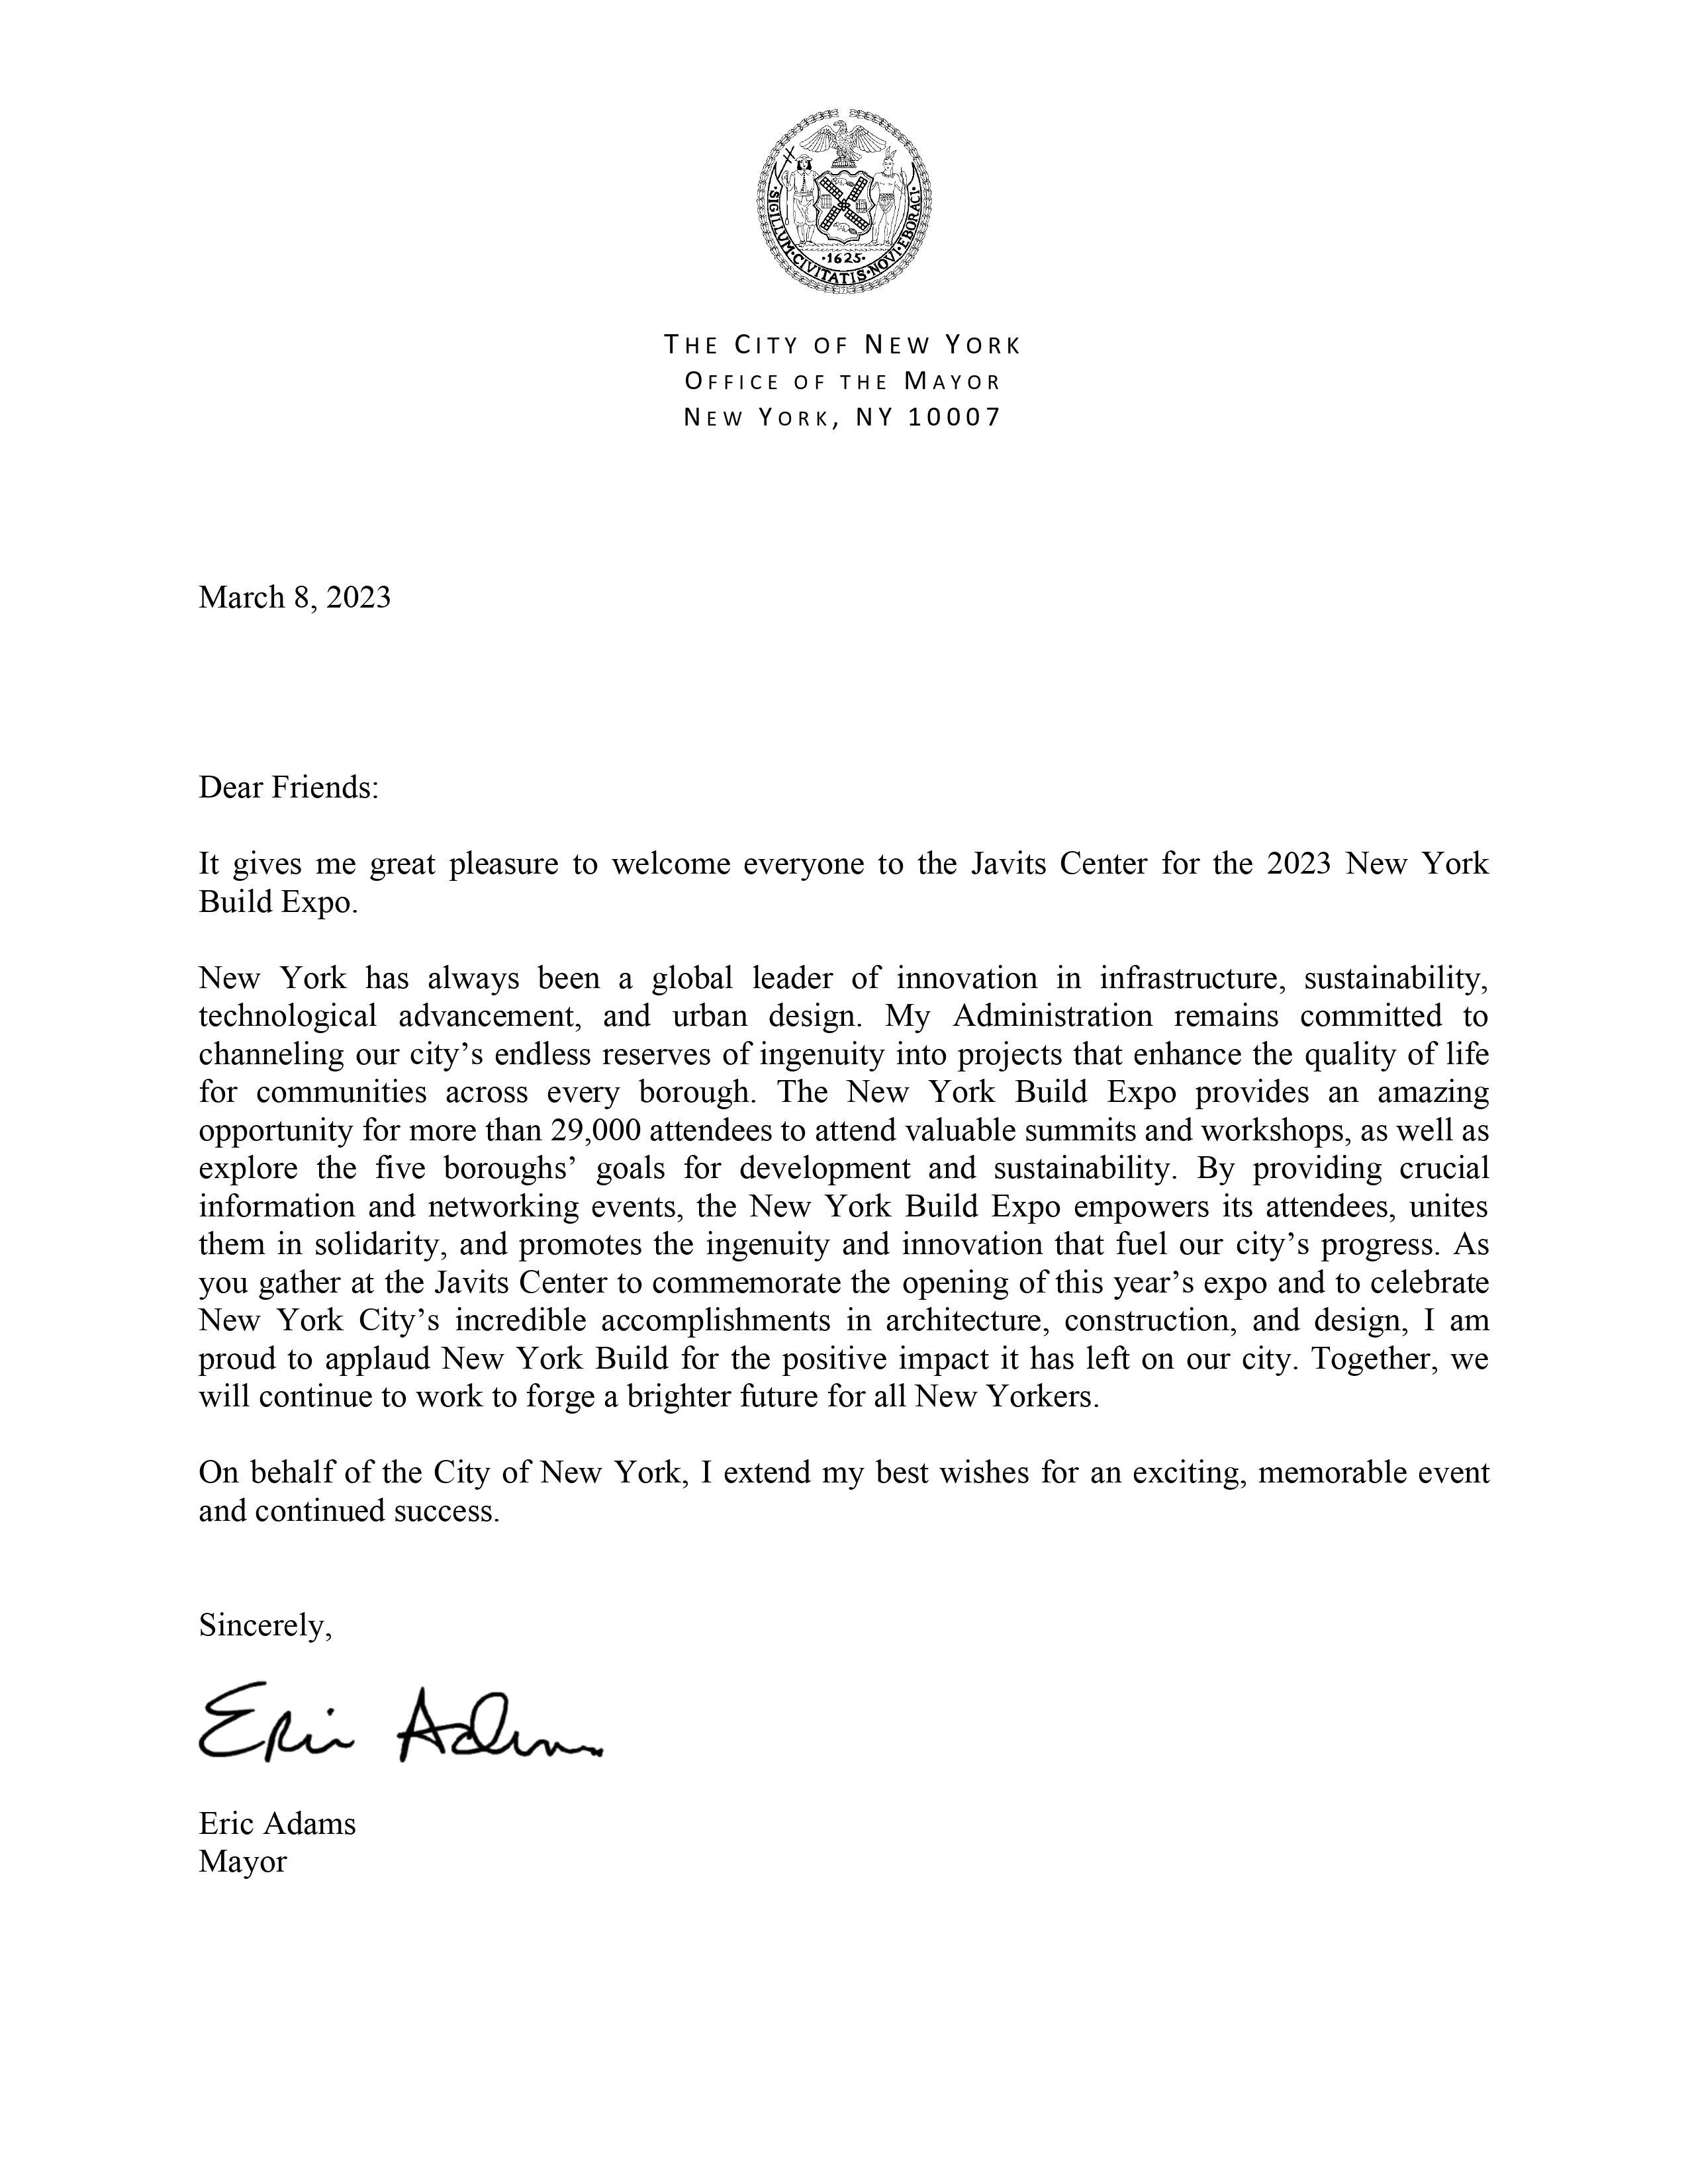 Mayor's Letter of Support